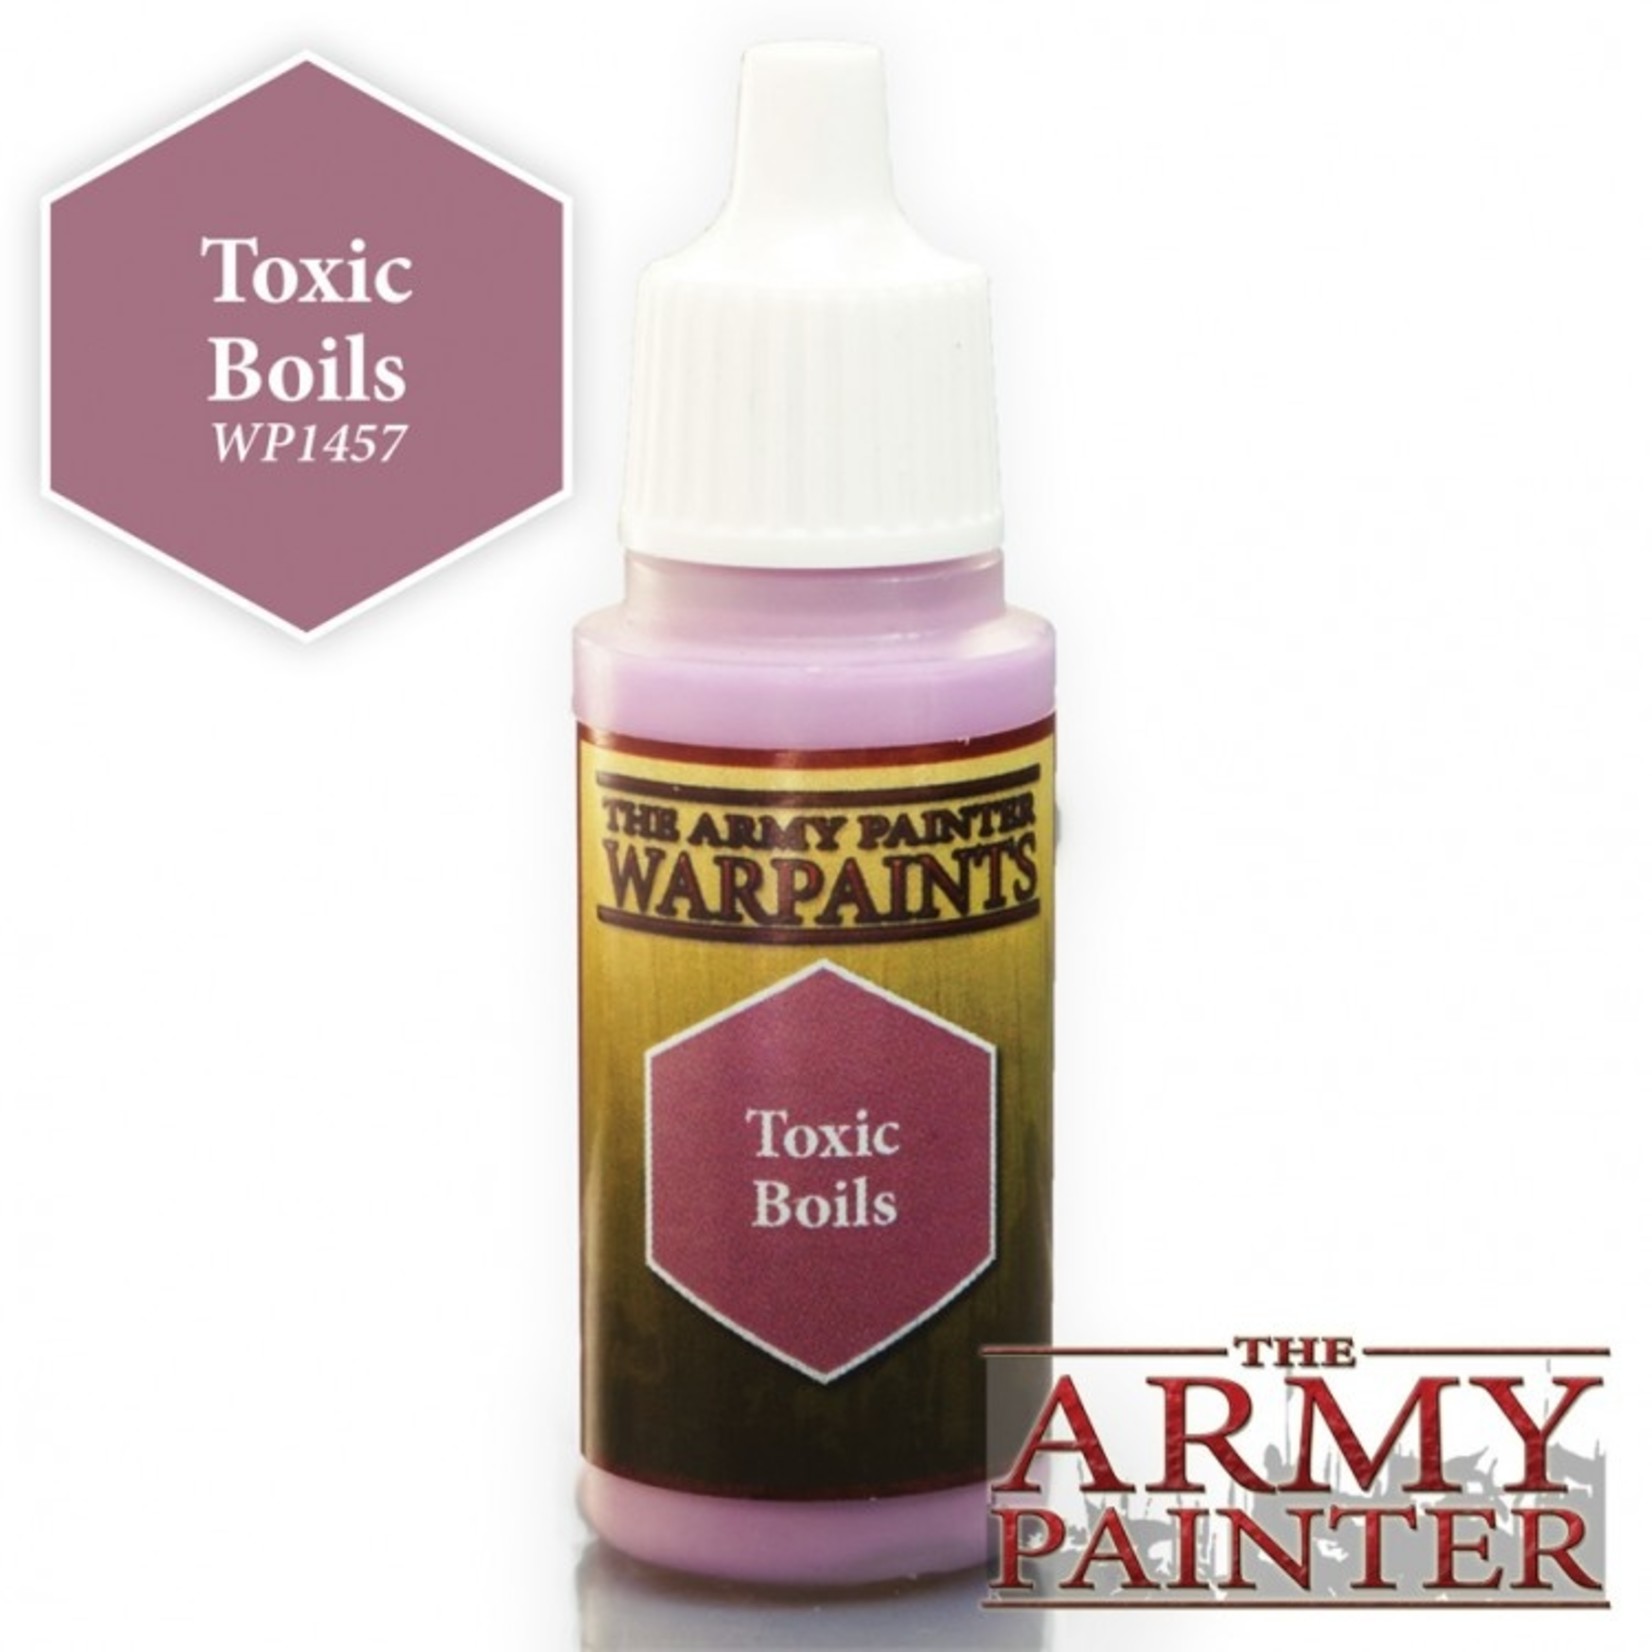 The Army Painter The Army Painter Toxic Boils 18ml